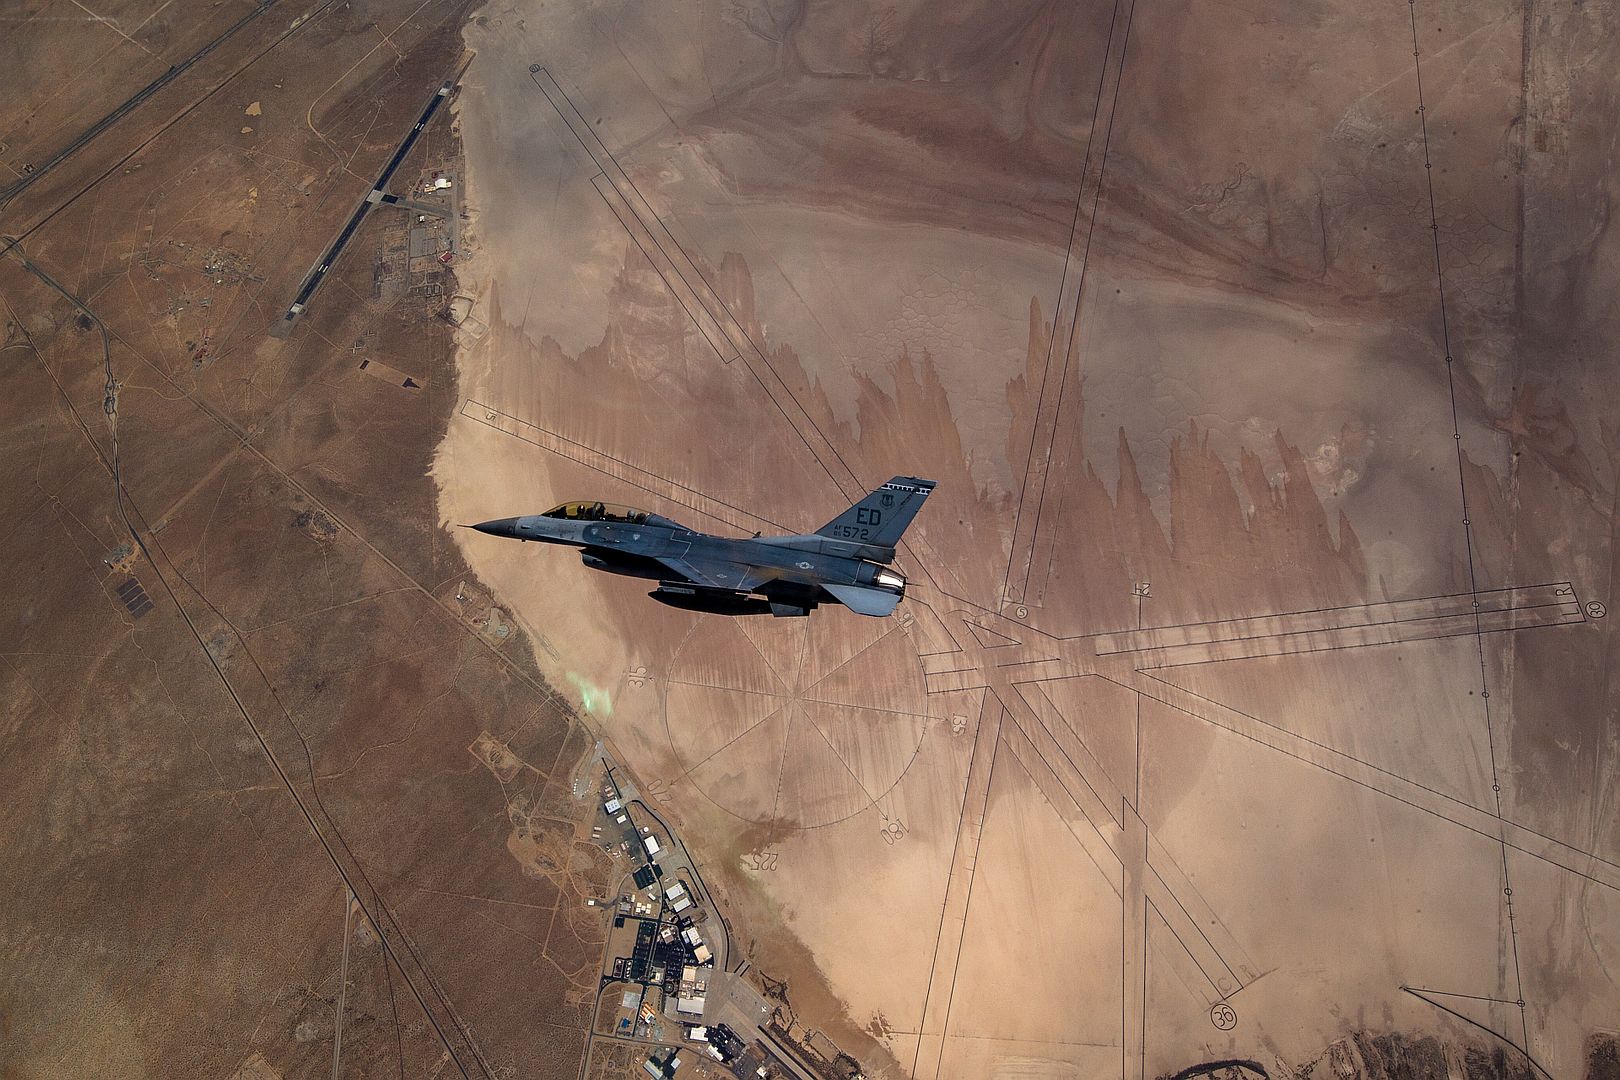  Stephen Jude 416th Flight Test Squadron Flies Over Edwards Air Force Base California July 23